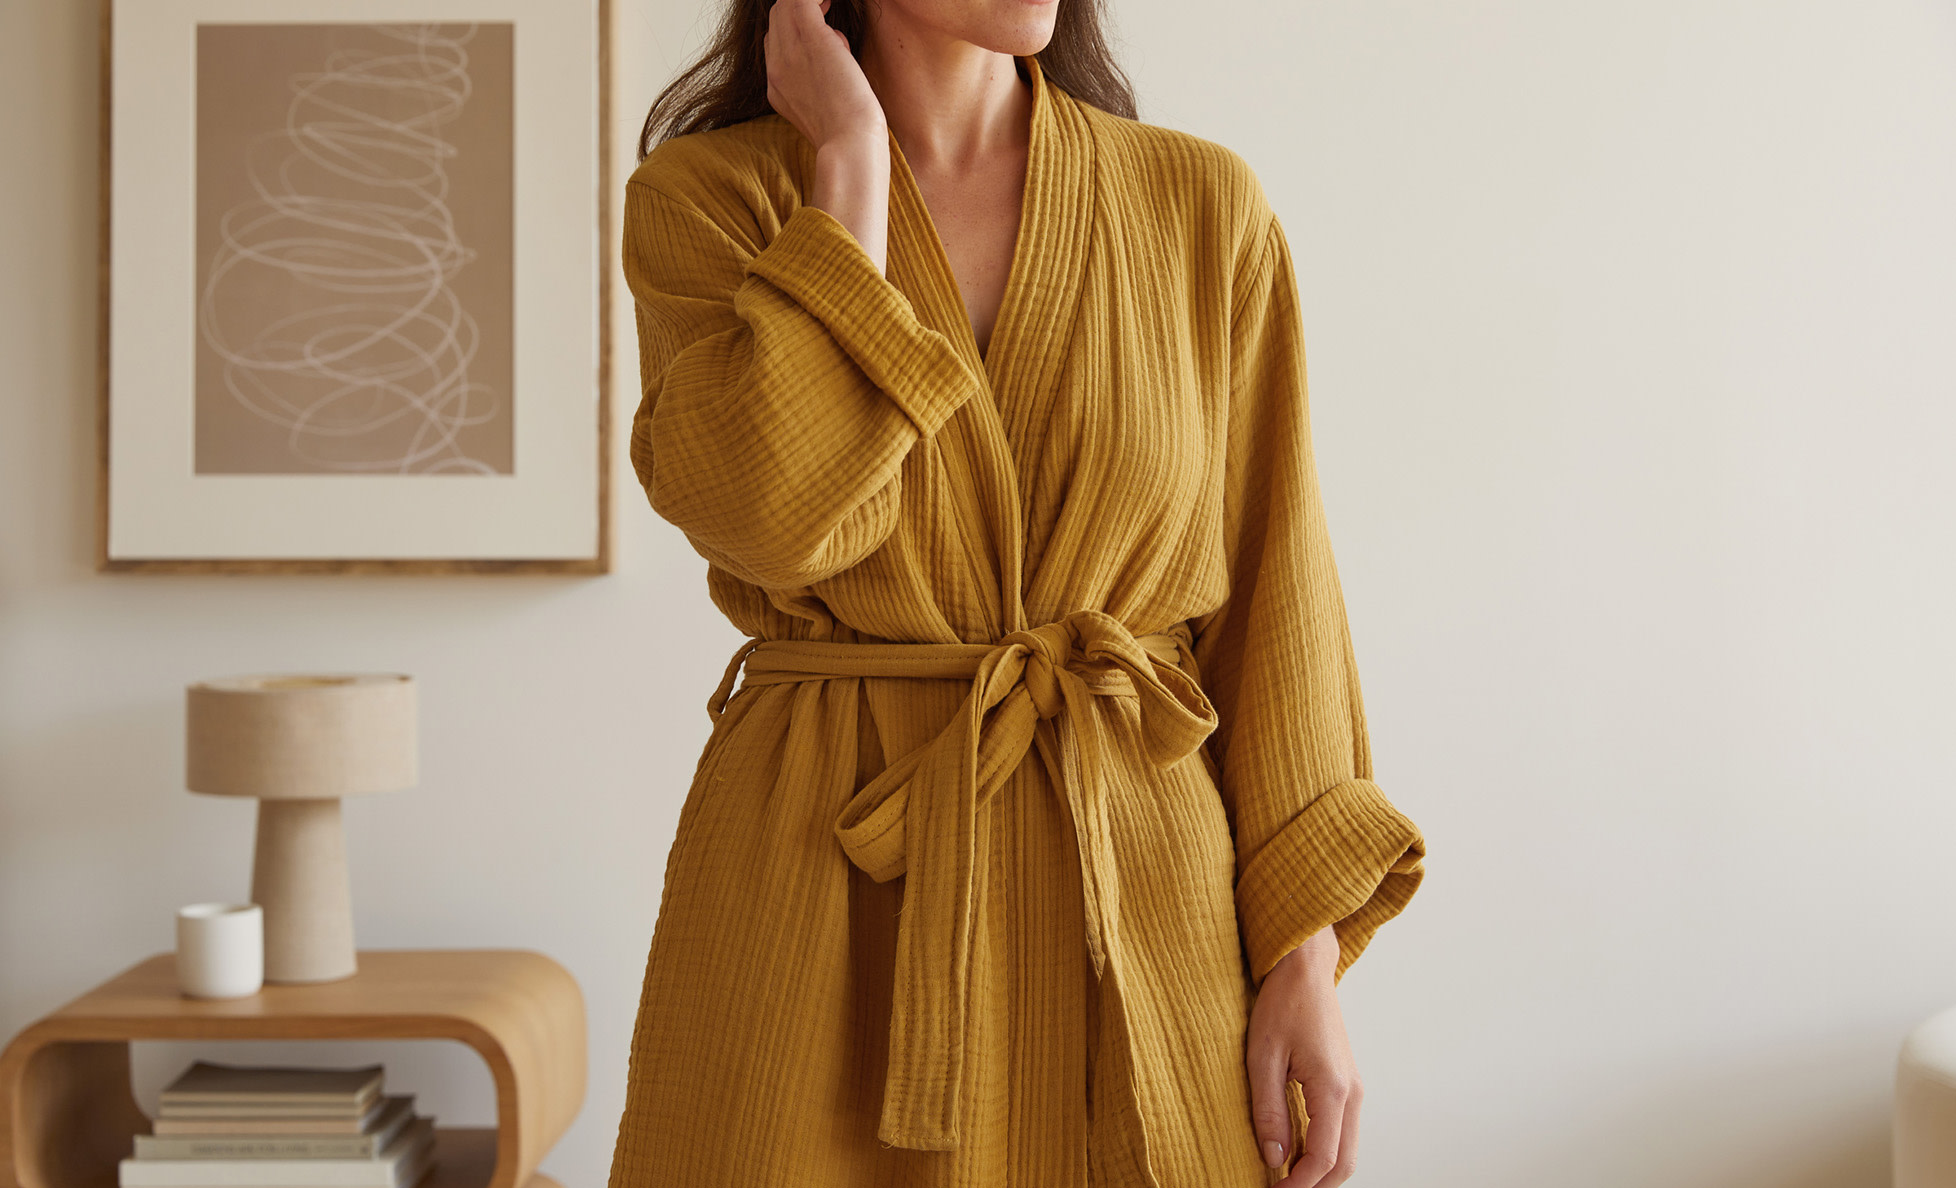 A woman wearing a cozy amber yellow robe